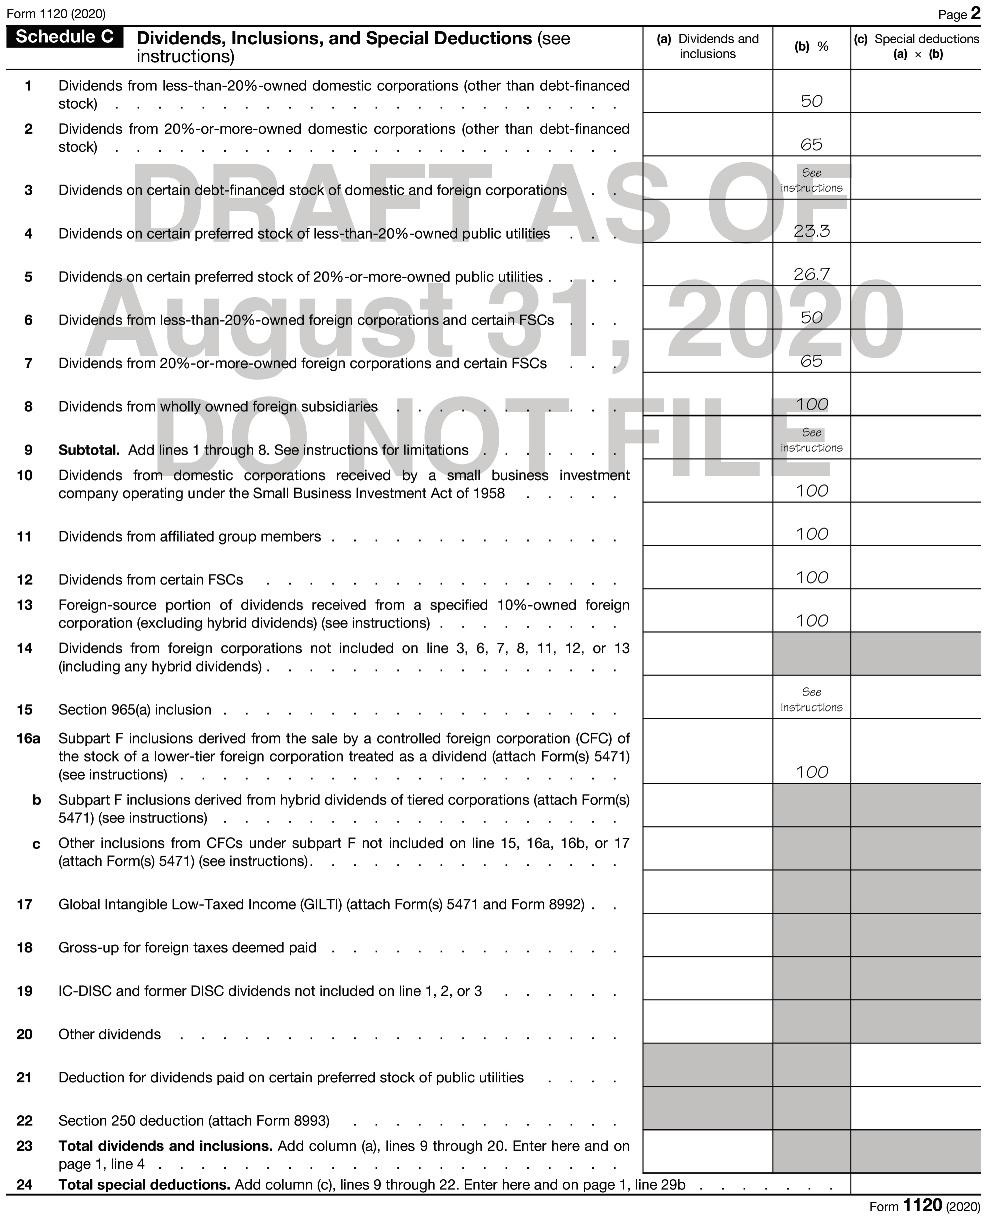 Form 1120 (2020) Schedule C Dividends, Inclusions, and Special Deductions (see instructions) 1 Dividends from